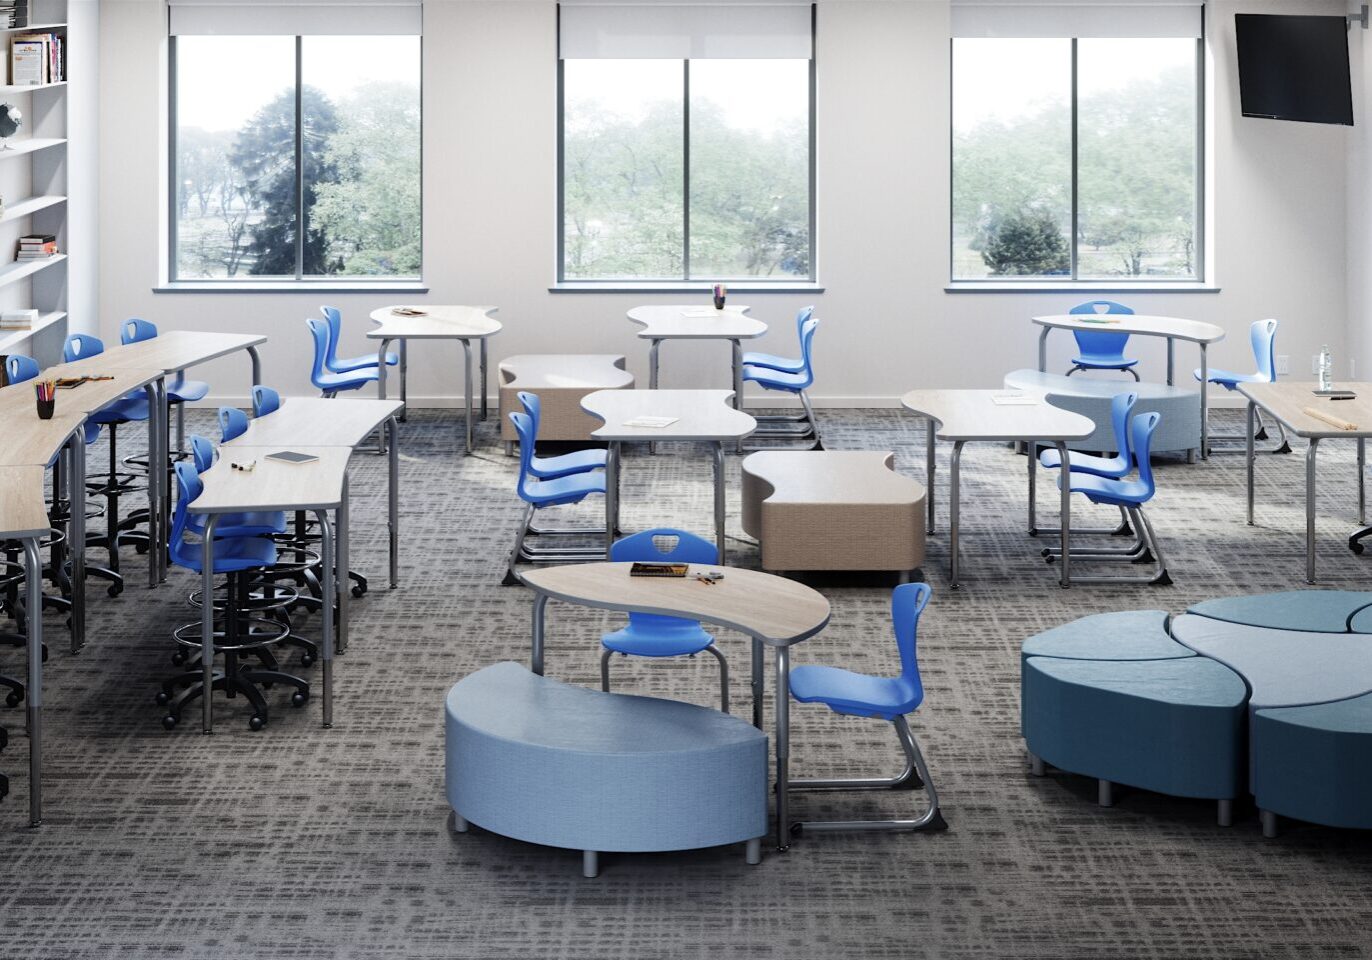 A classroom with many tables and chairs in it